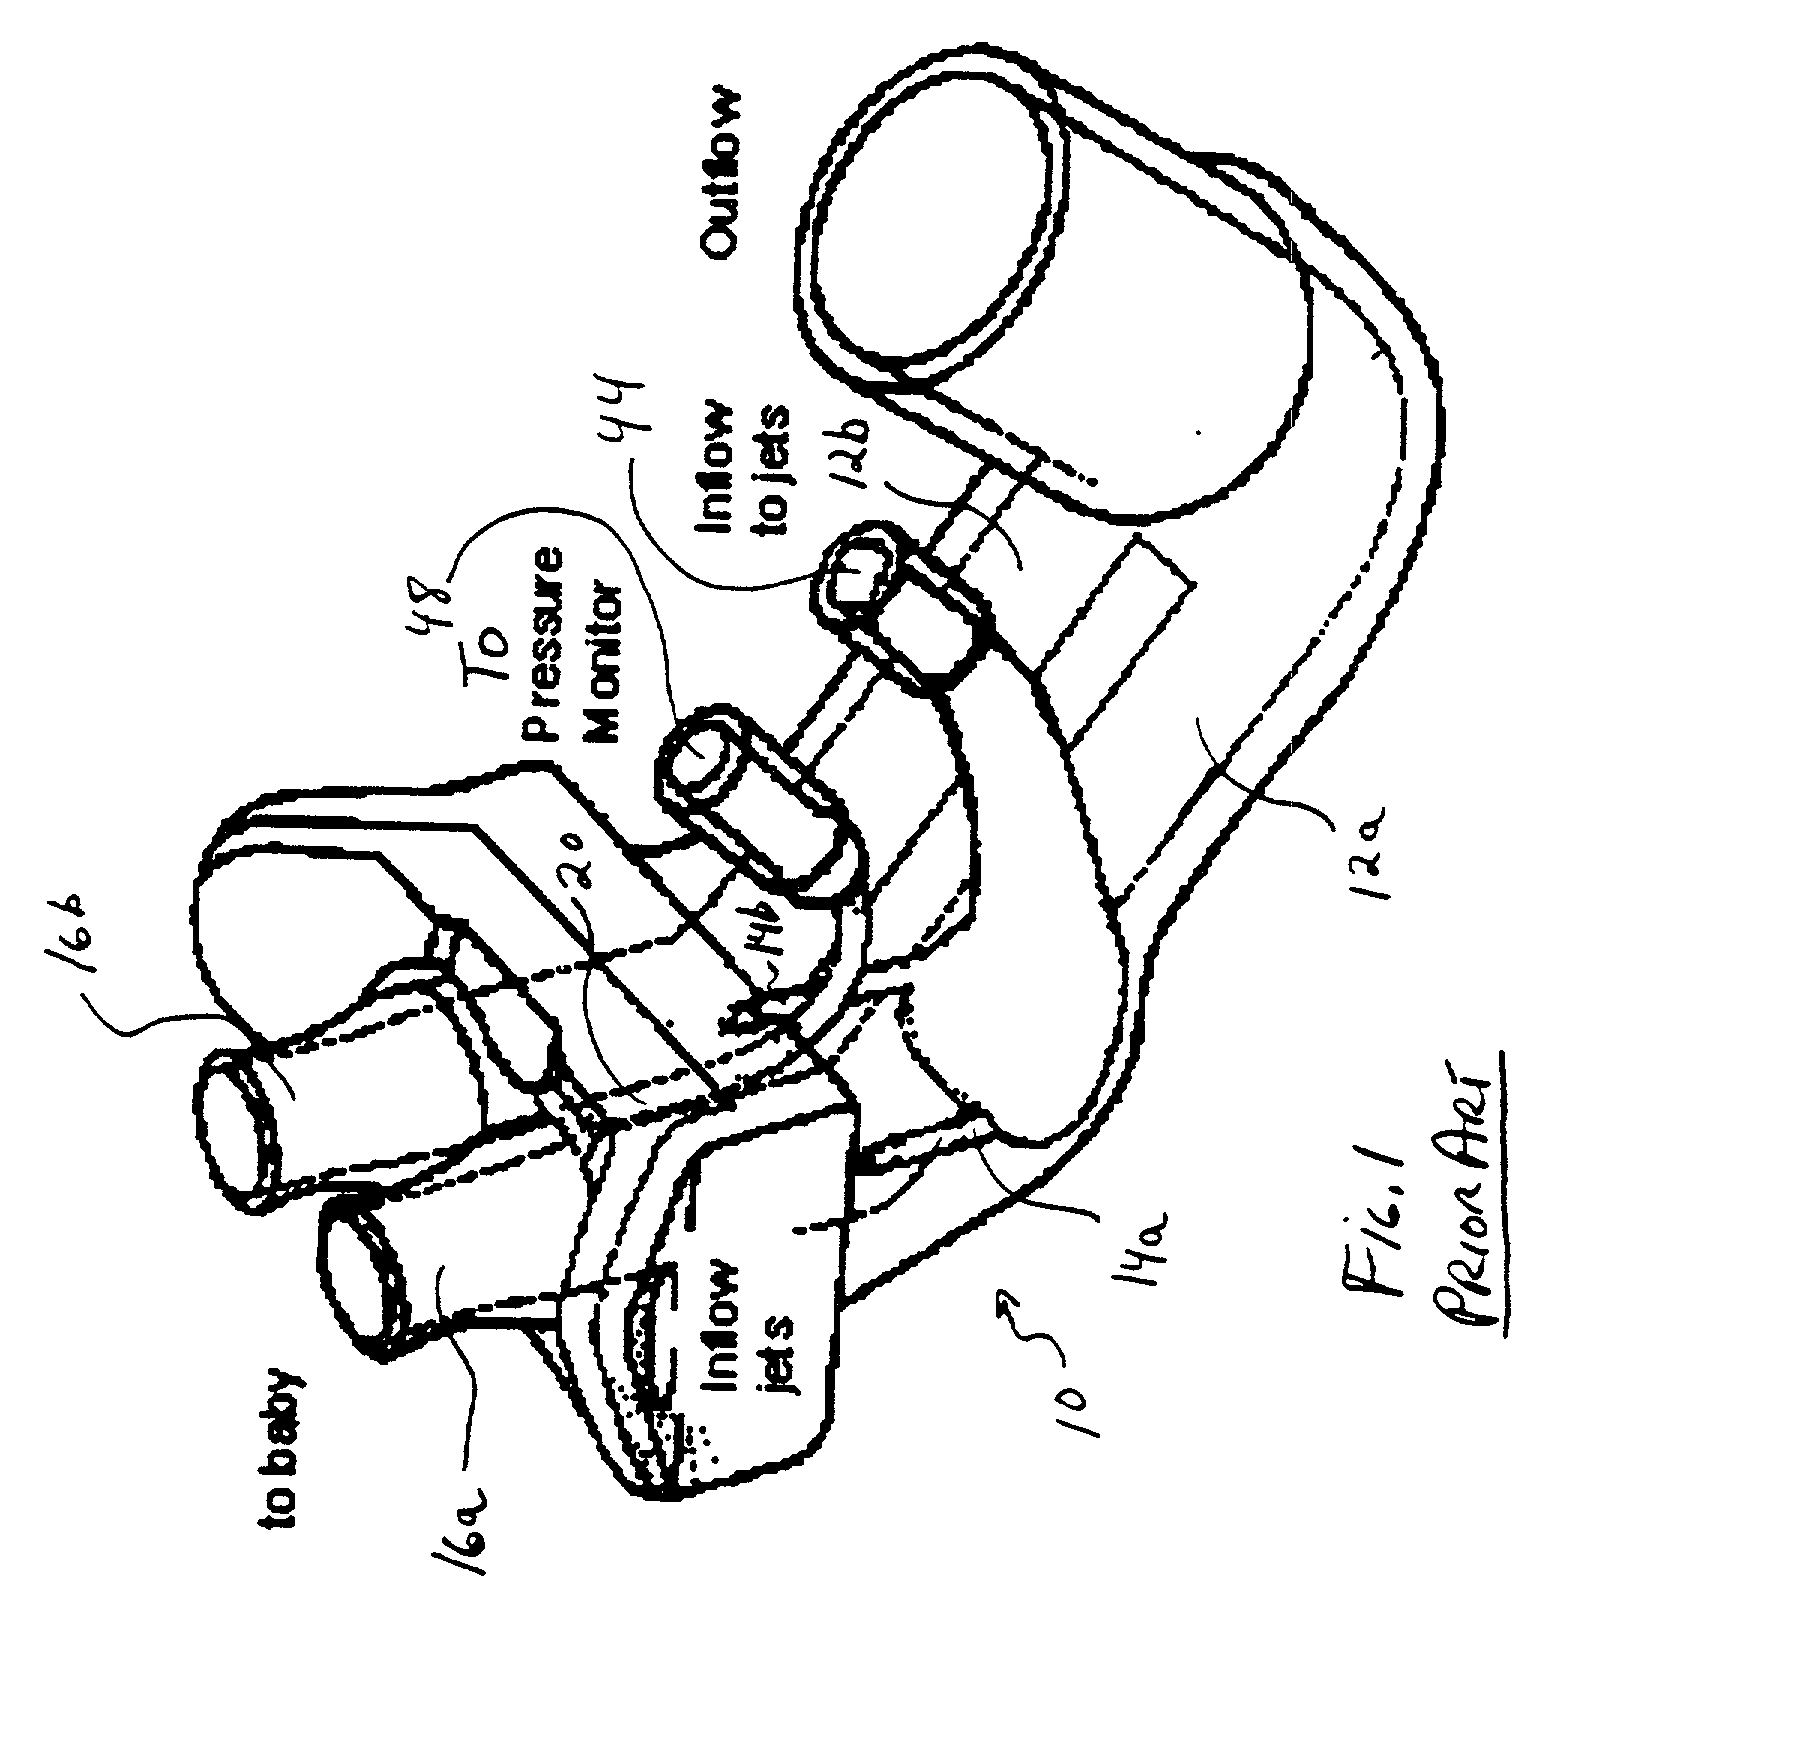 Method and apparatus for injecting sighs during the administration of continuous positive airway pressure therapy